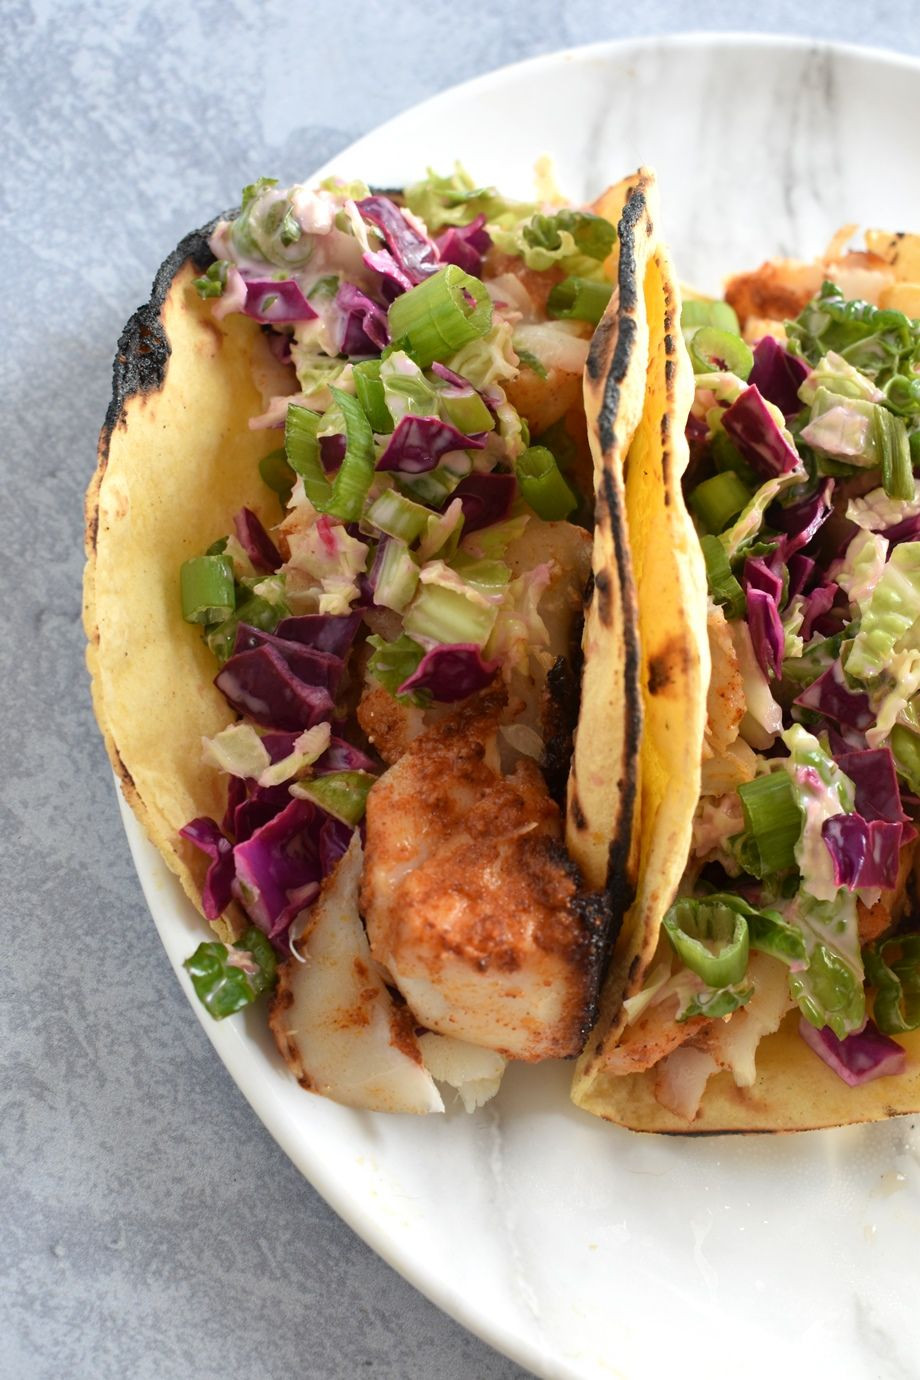 Coleslaw Recipes for Fish Tacos Lovely Blackened Fish Tacos with Creamy Lime Coleslaw